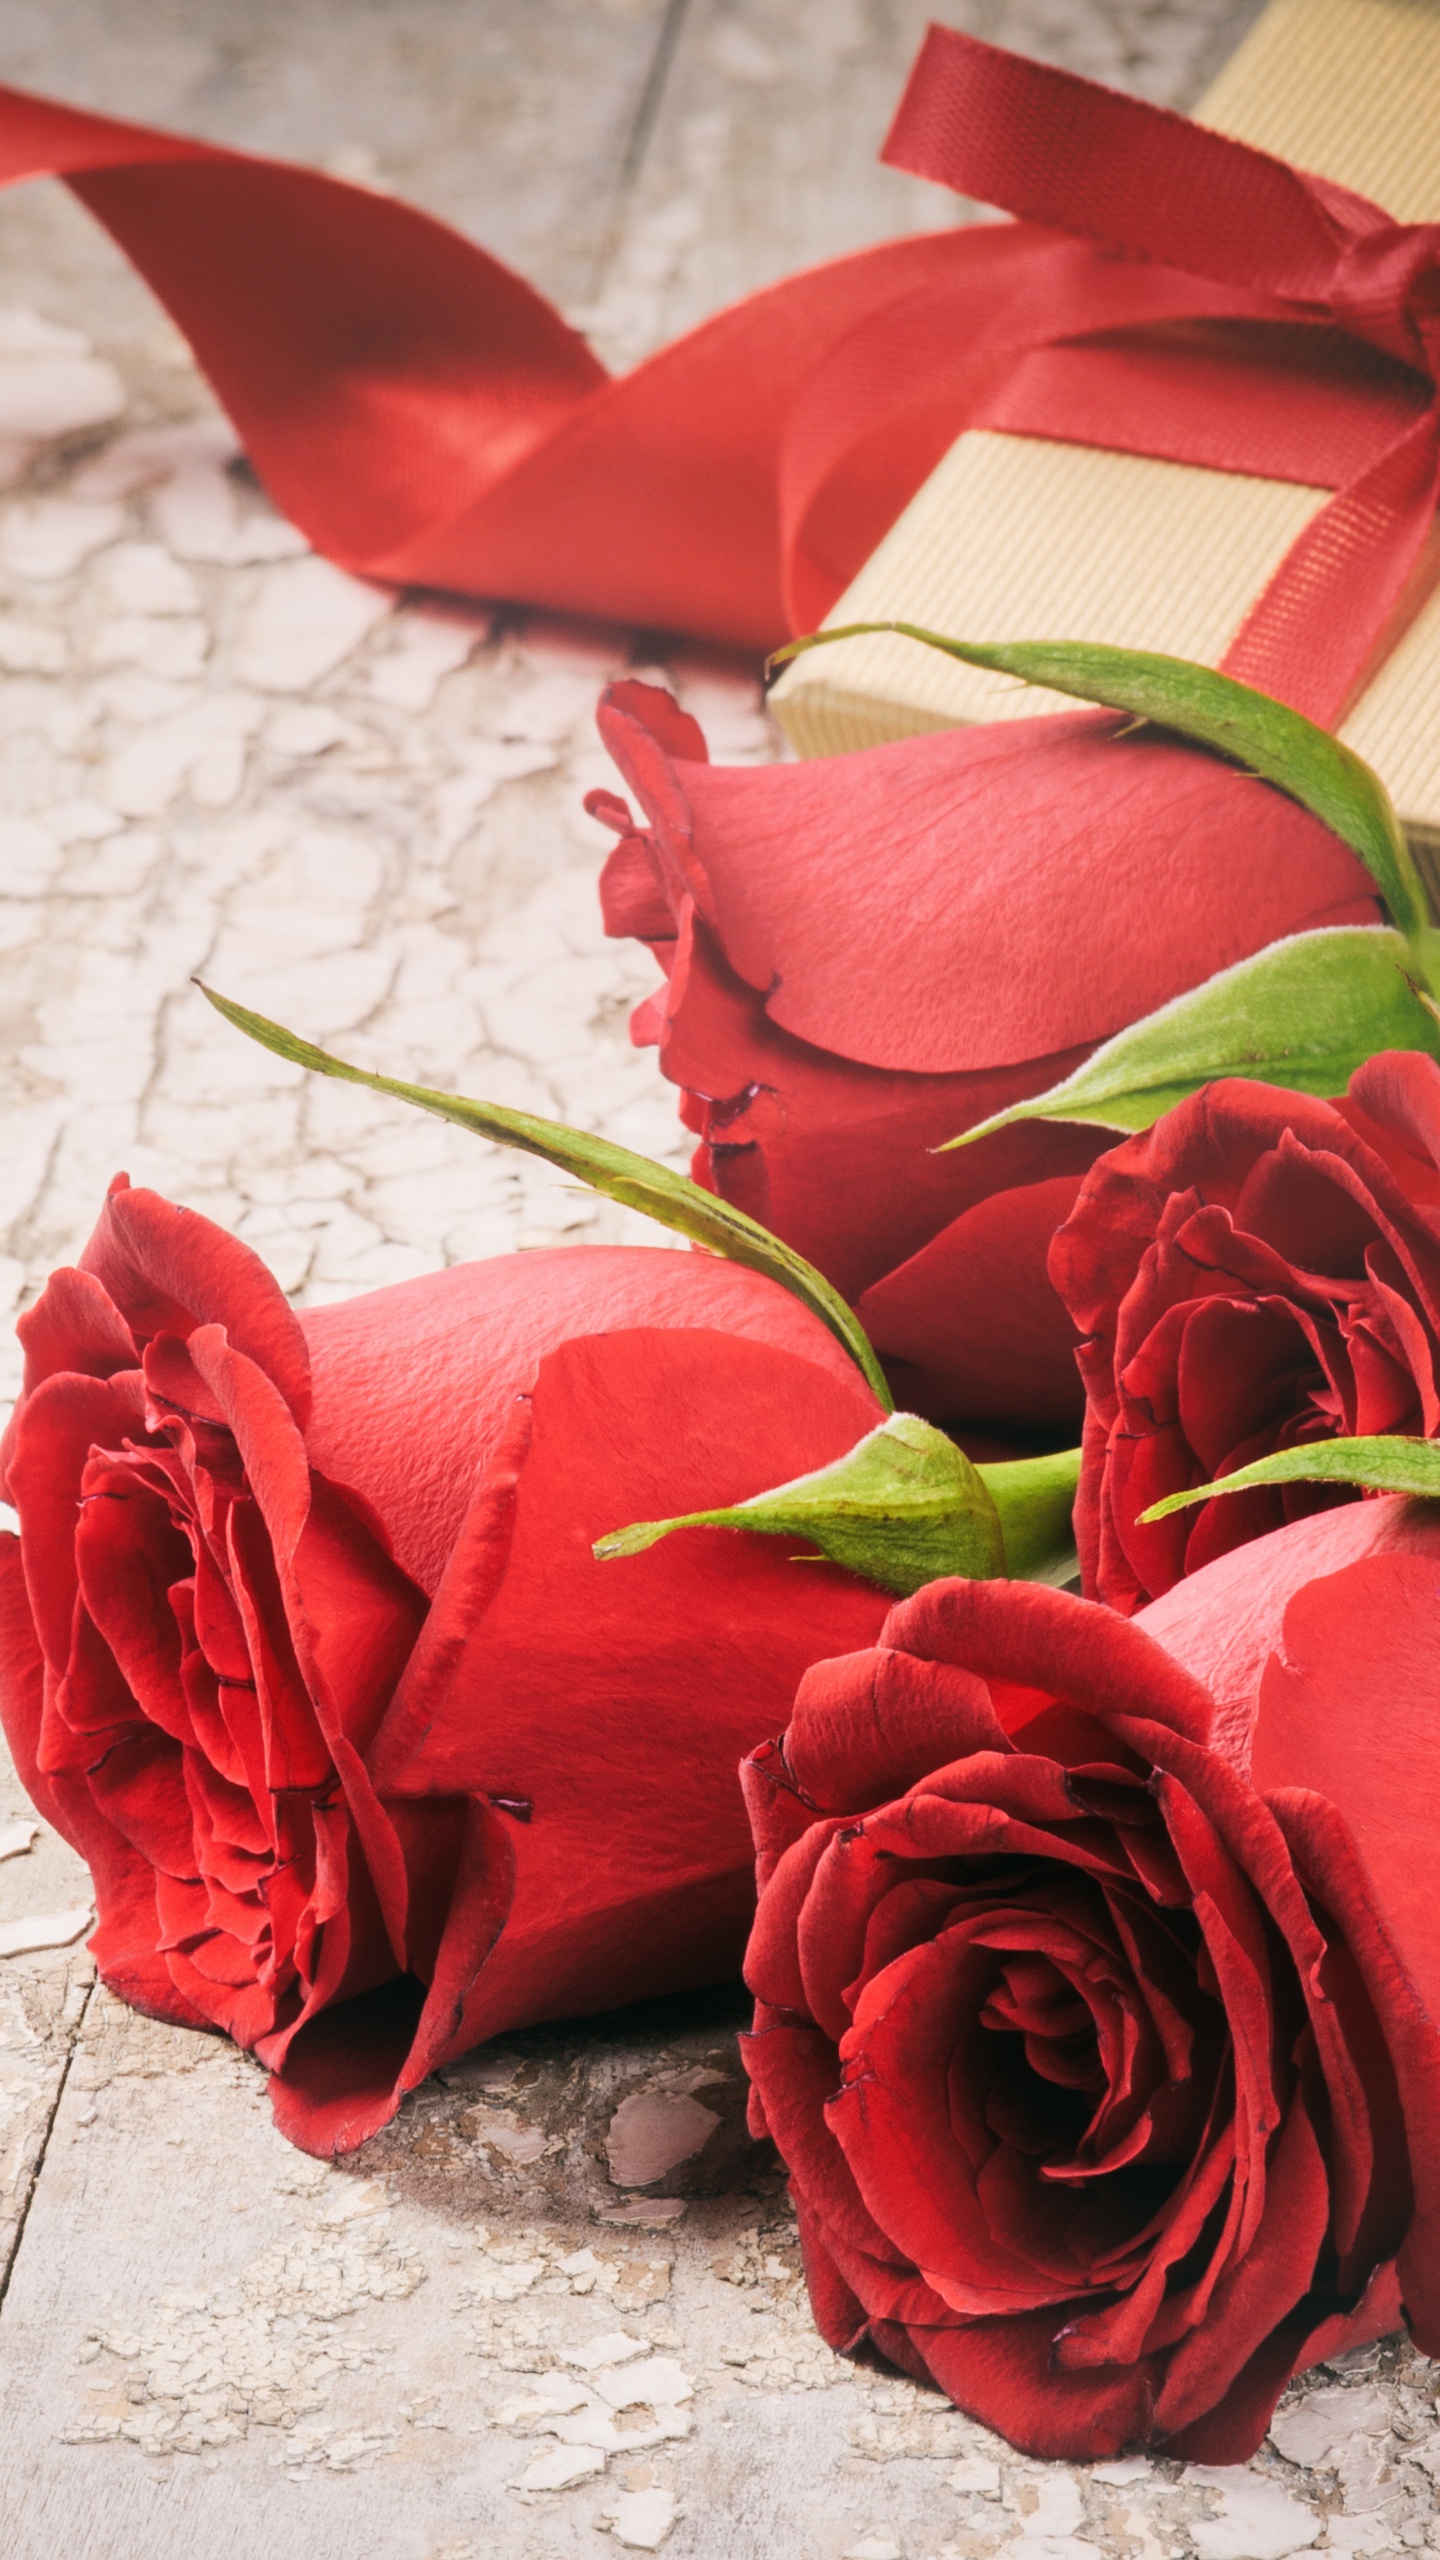 Roses Rouges Sur Textile Blanc. Wallpaper in 1440x2560 Resolution